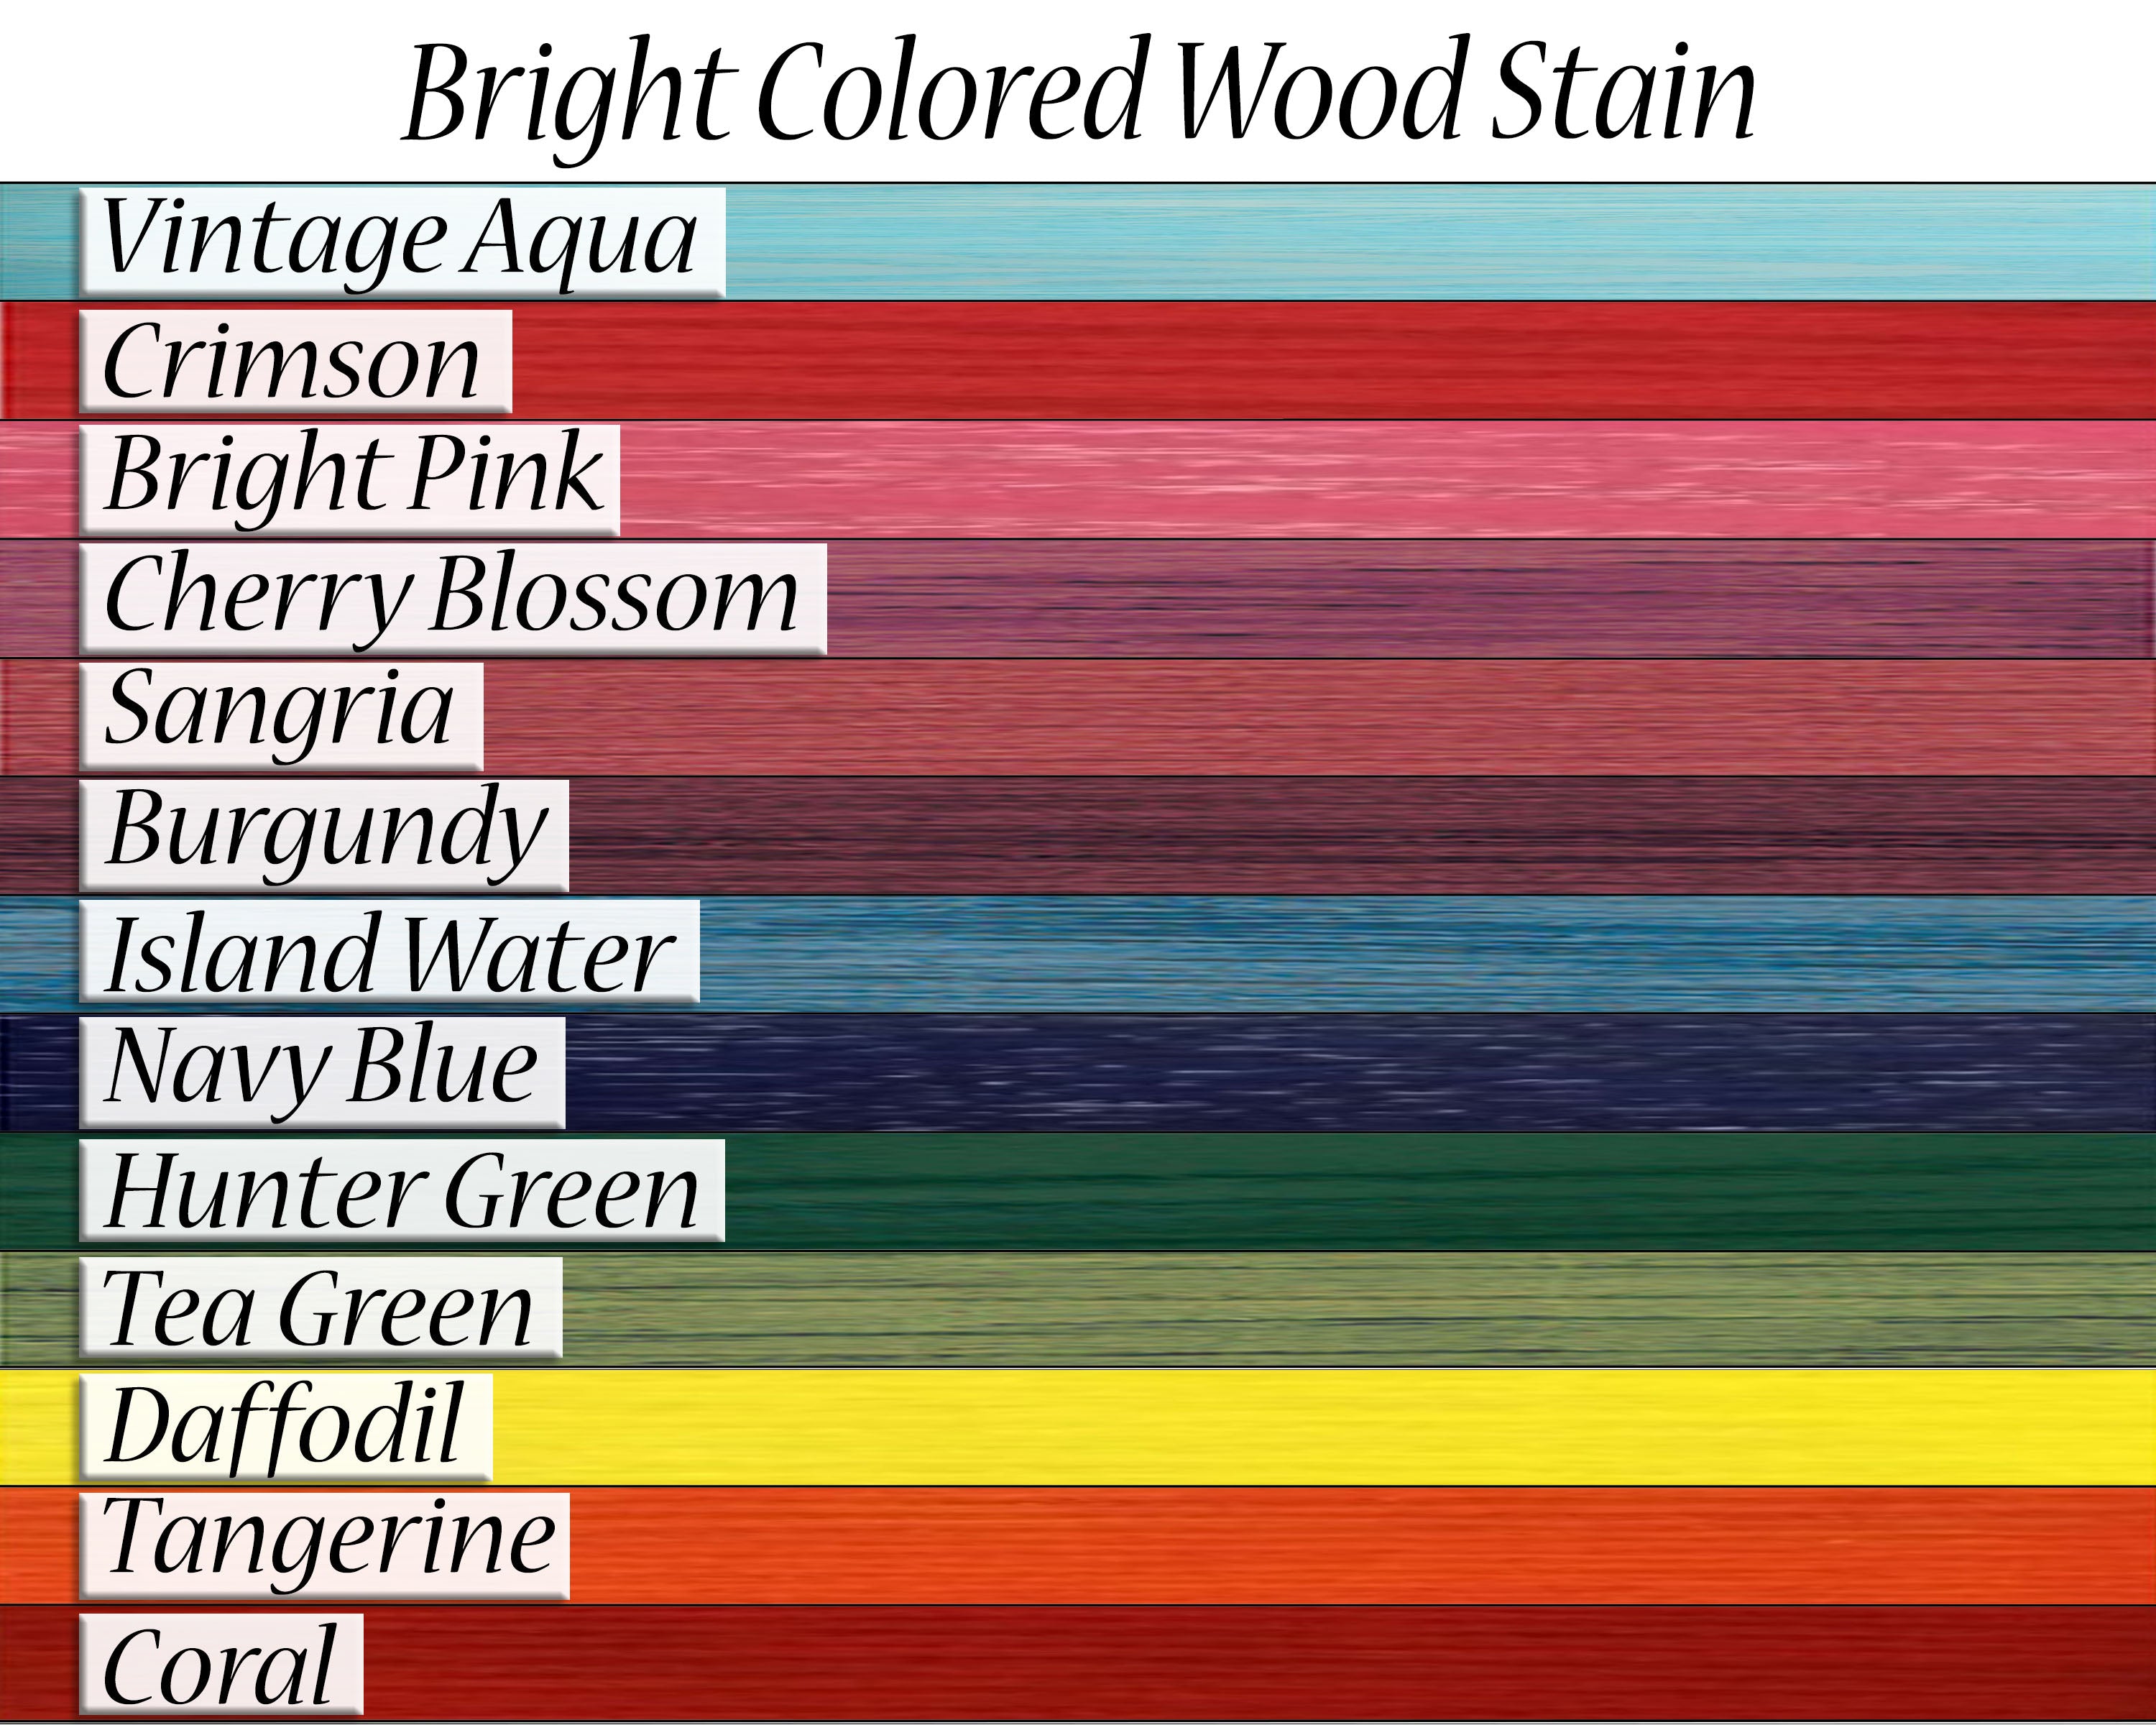 Custom Bright Colored Stains 